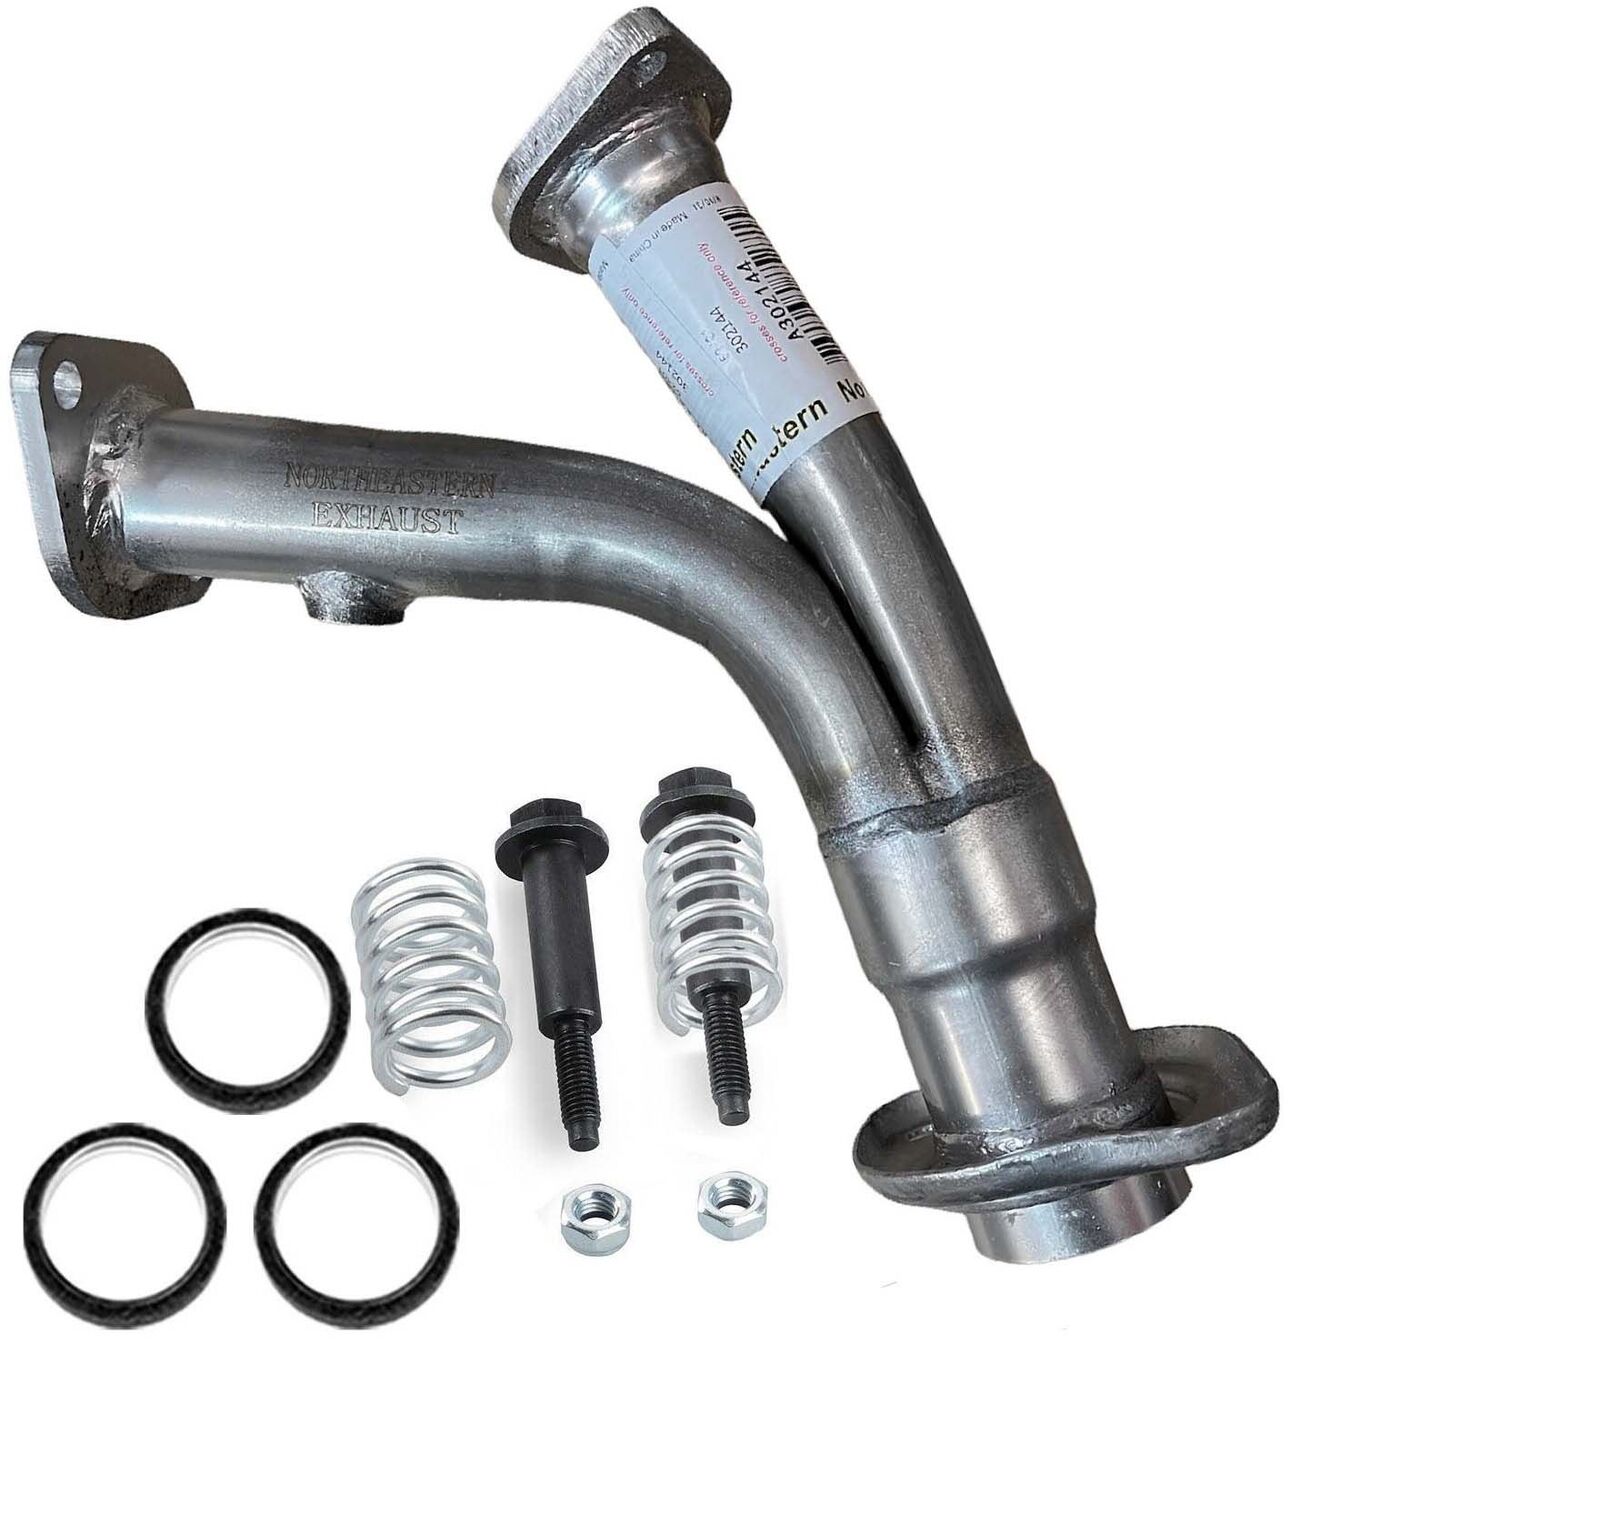 Front Exhaust Y Pipe fits: 2004-2009 RX330 RX350 2004-2012 Highlander